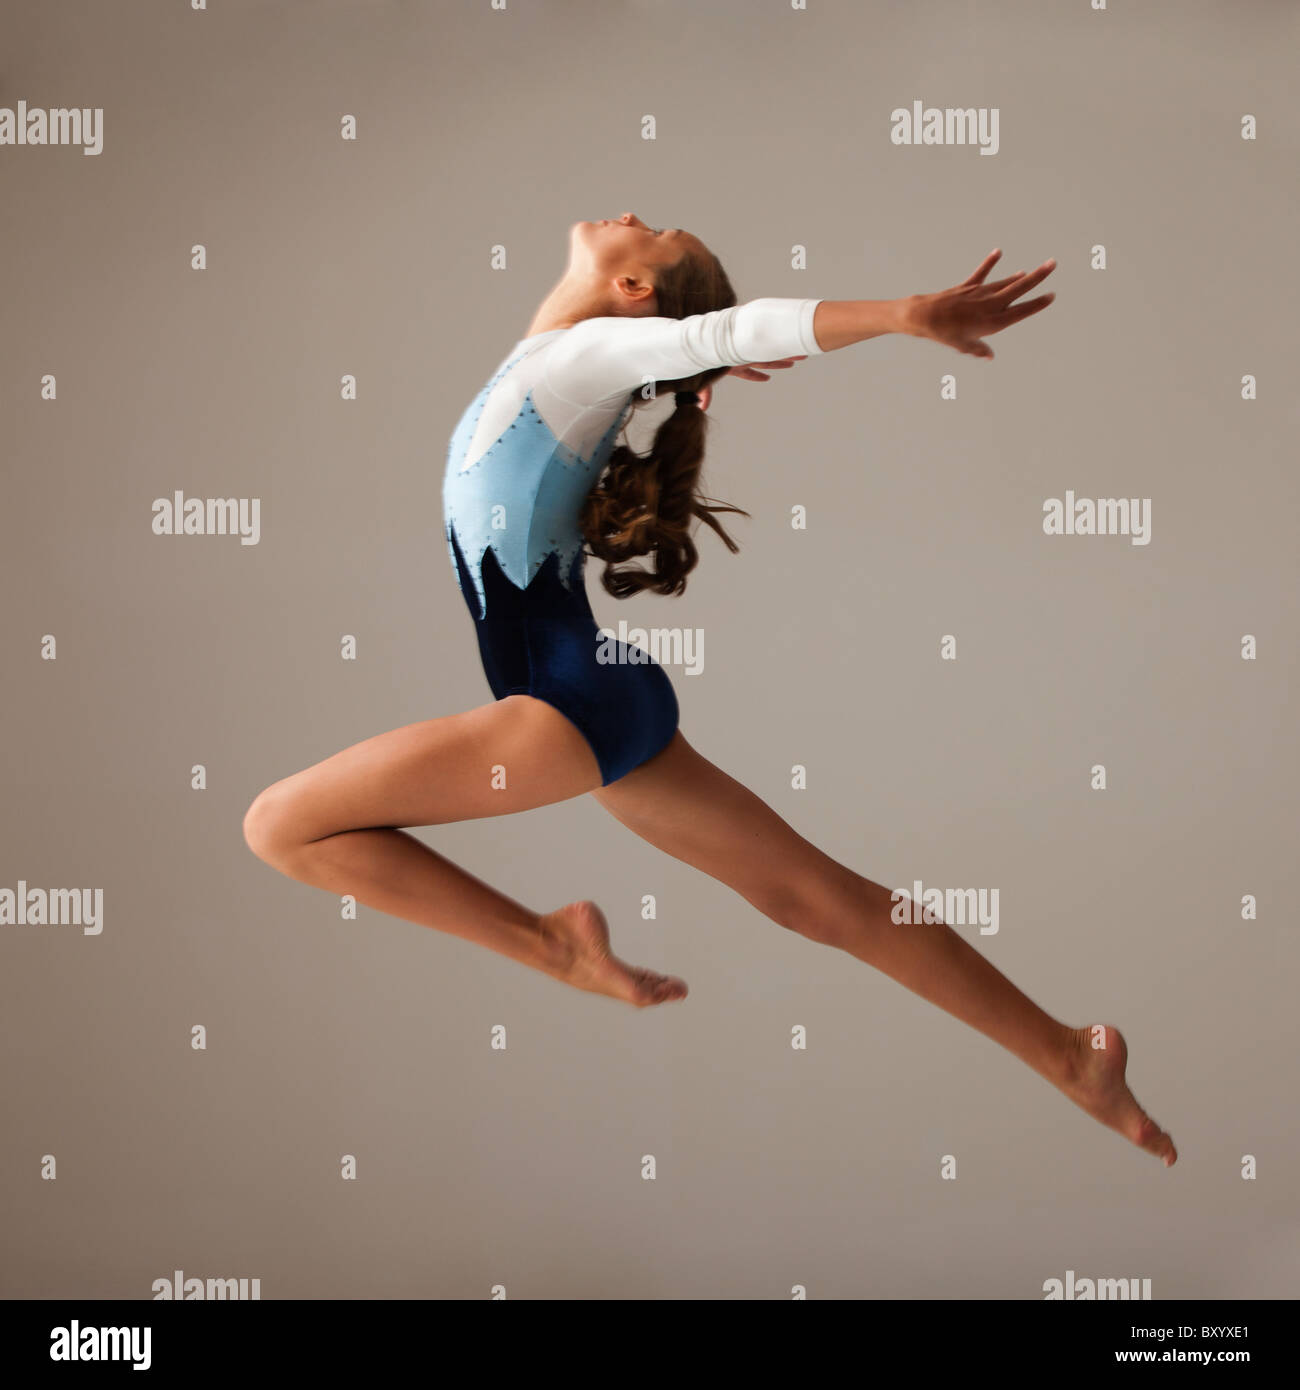 Female gymnast leaping Stock Photo